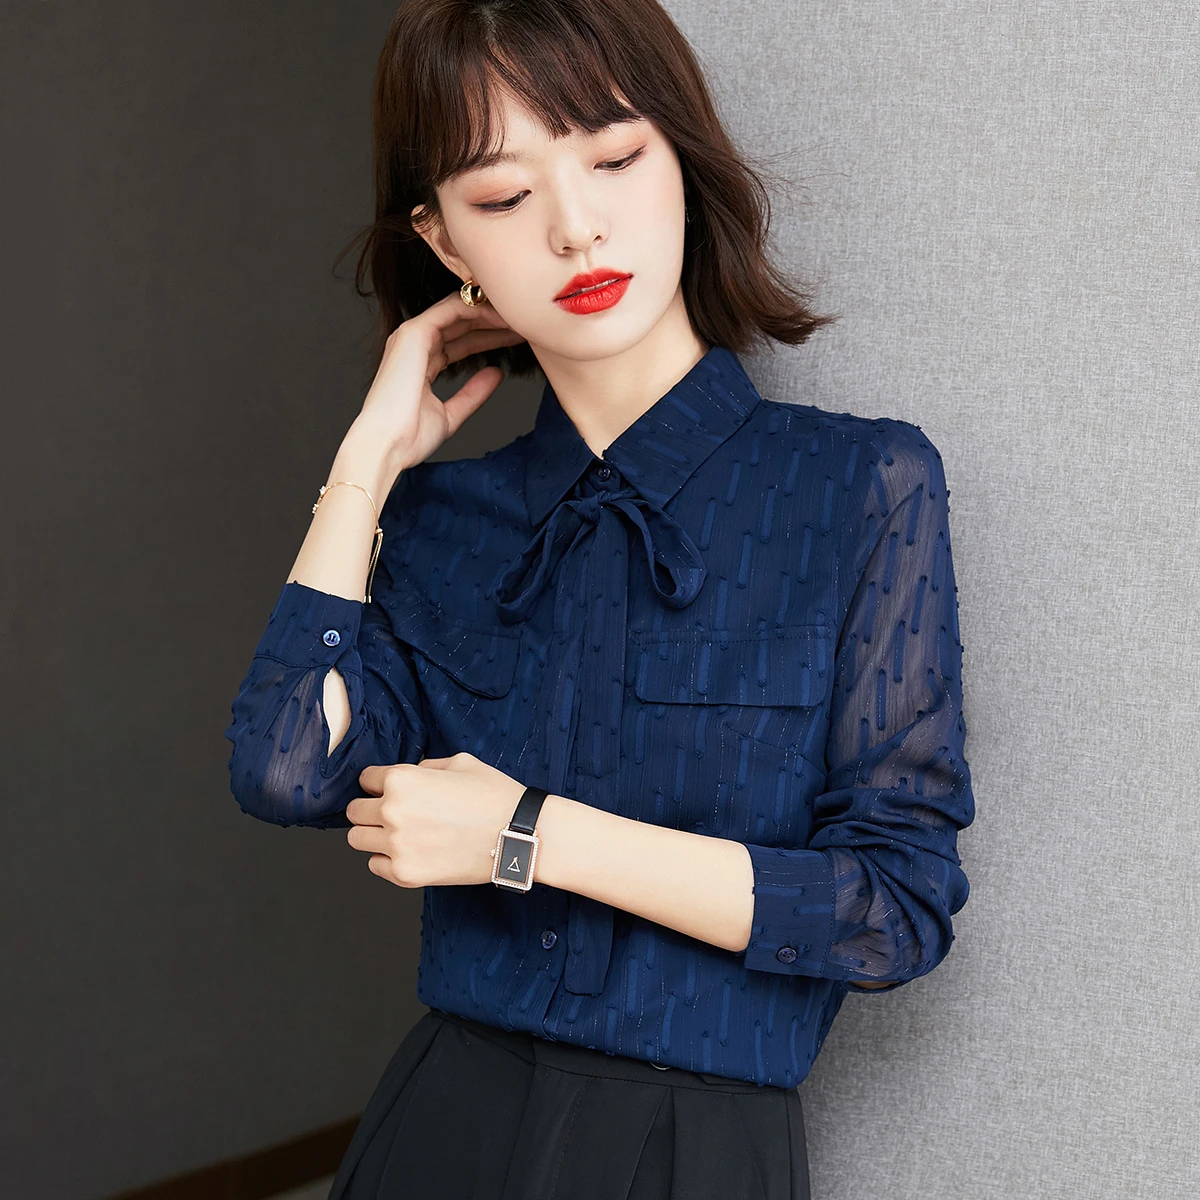 

Chiffon Women's Blouse Lace Polo Girl's Shirt Casual Clothing Splicing Long Sleeve Top Loose Spring Autumn Lady Blusas Houthion